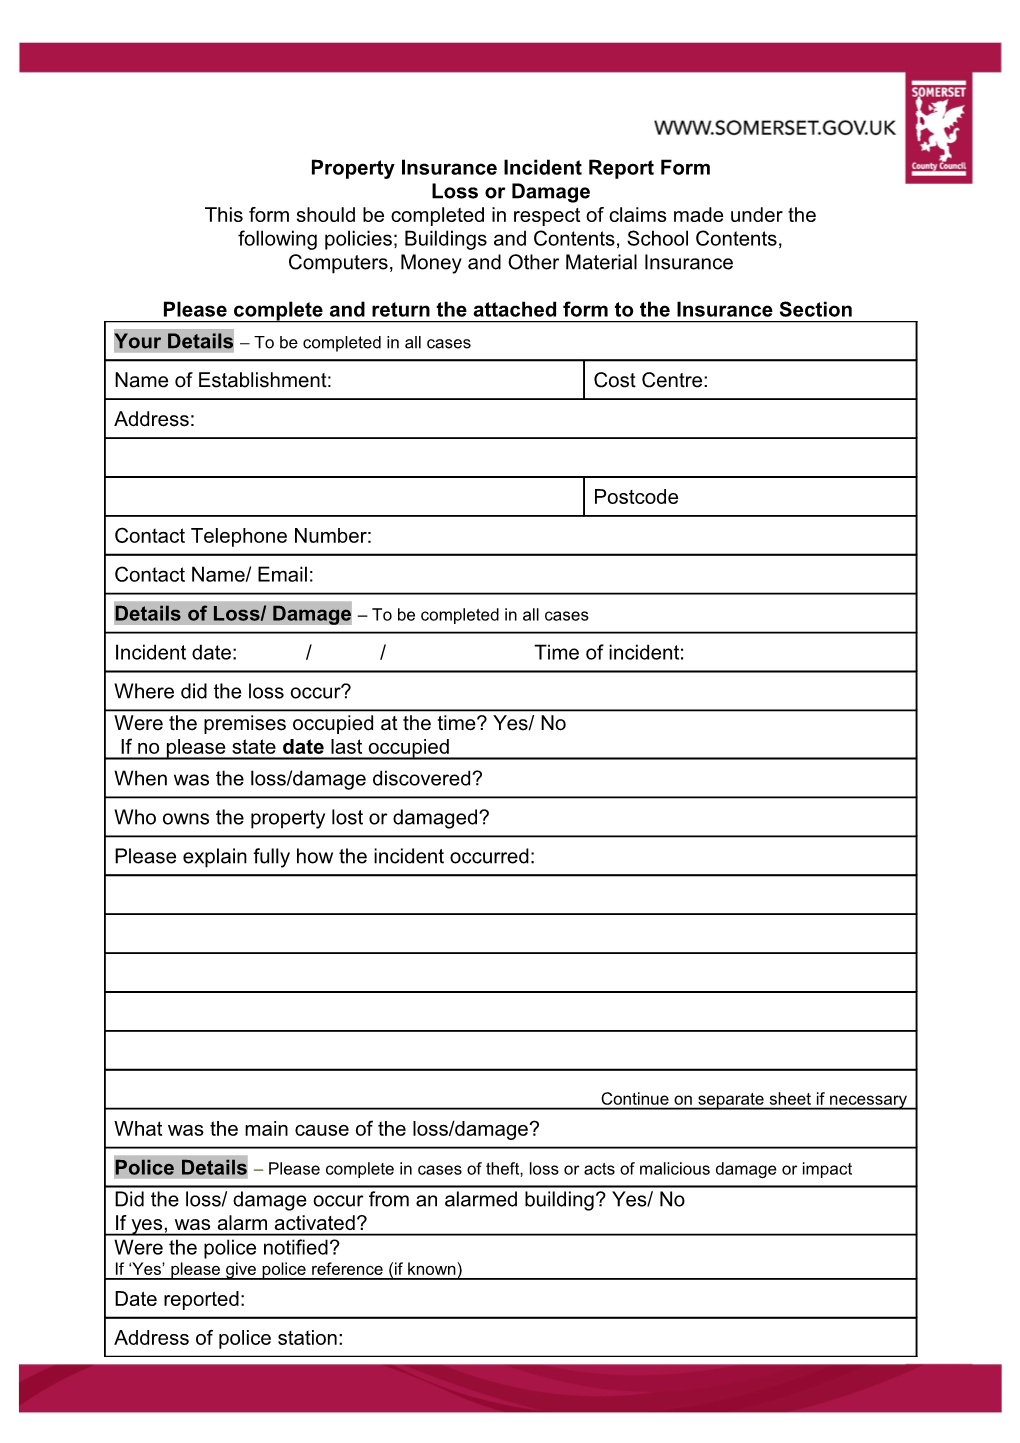 Property Insurance Incident Report Form